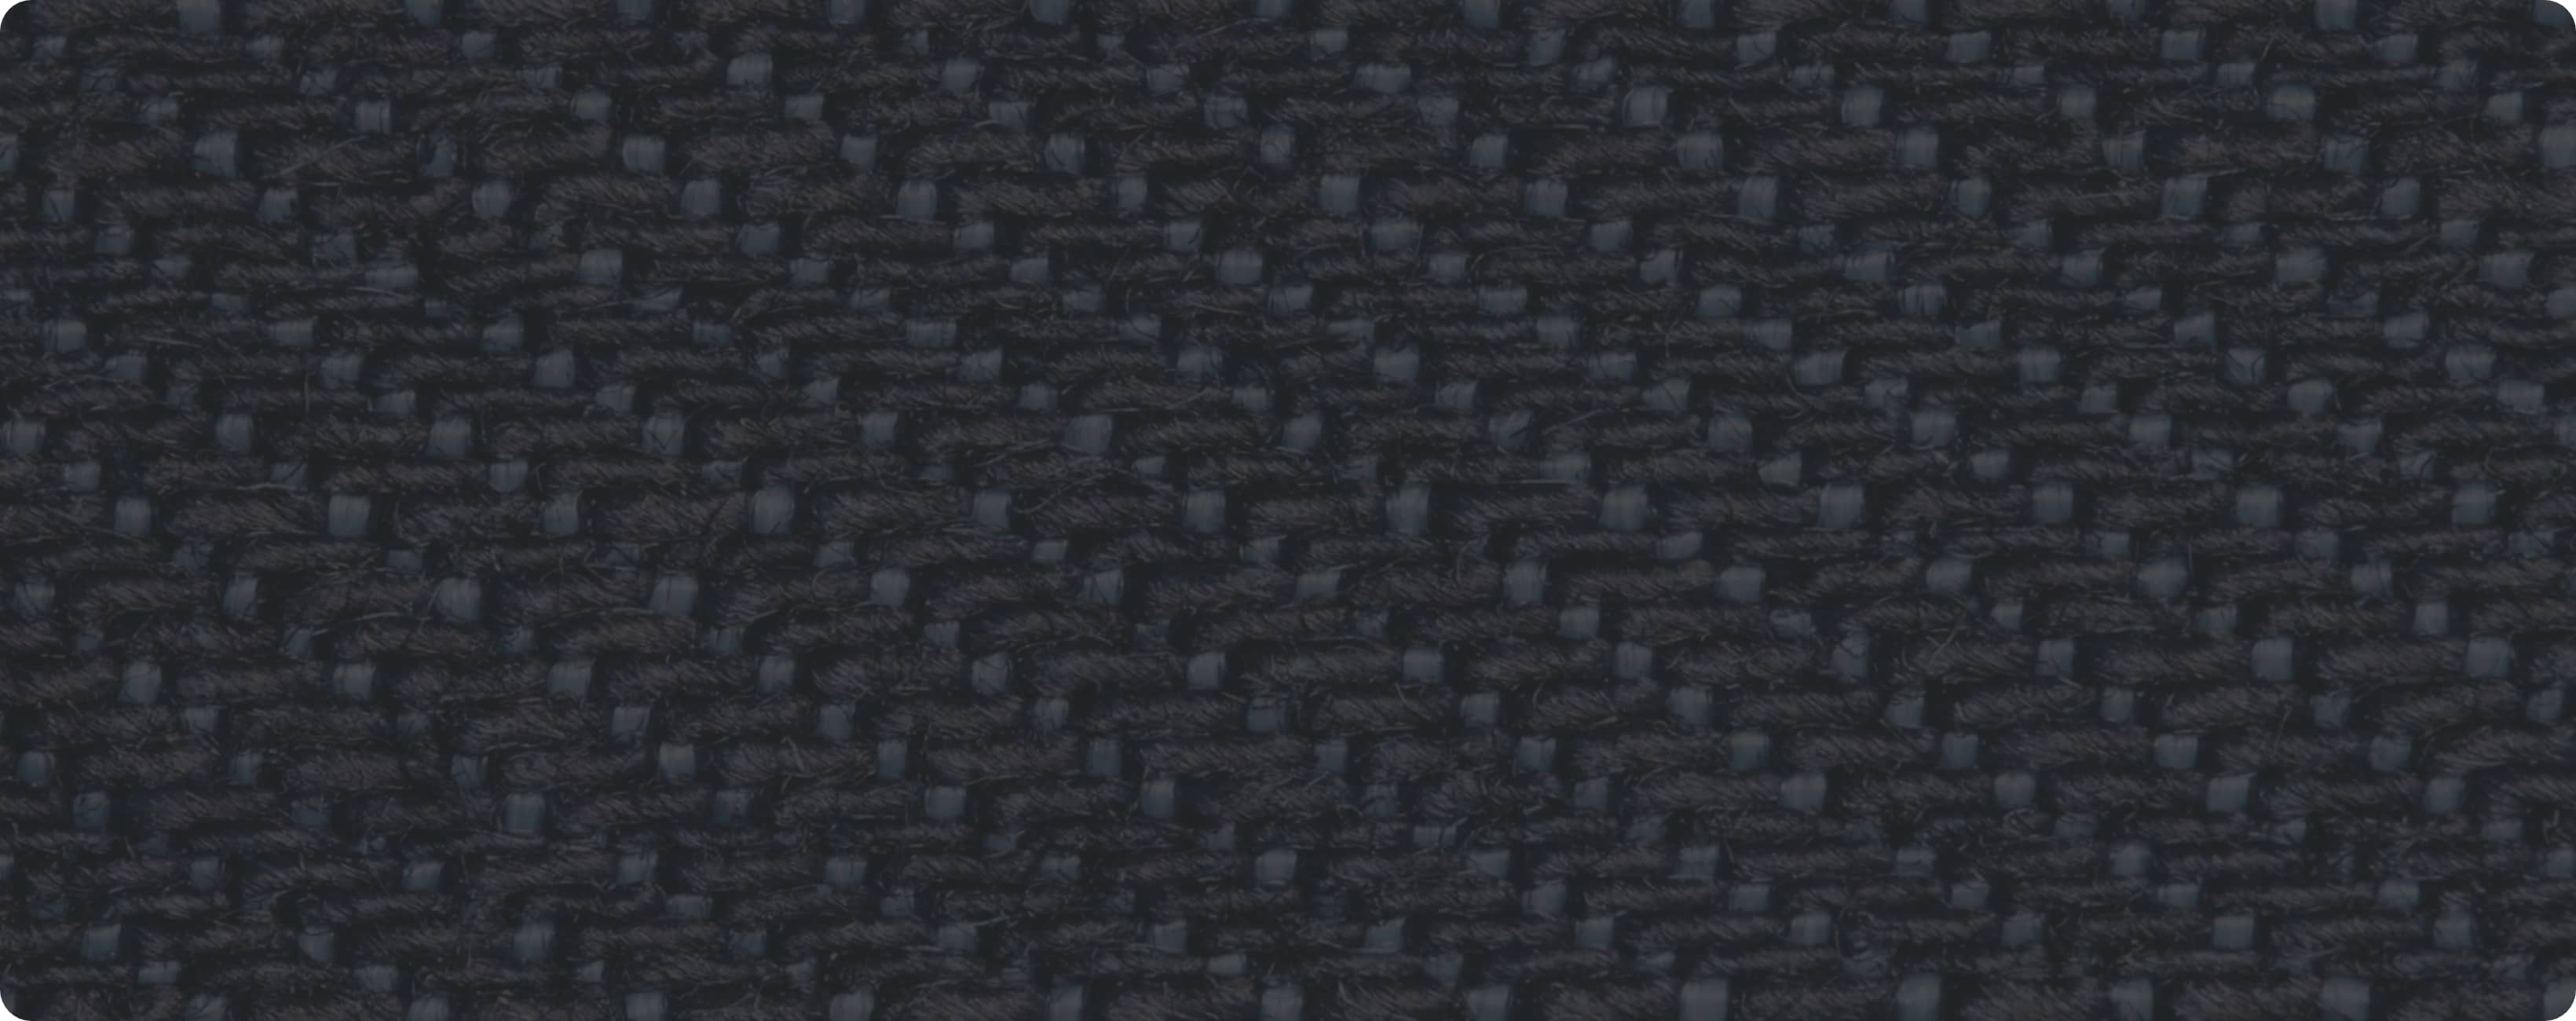 Denim Fabric Consumption Market Trends, Challenges And Opportunities To 2016